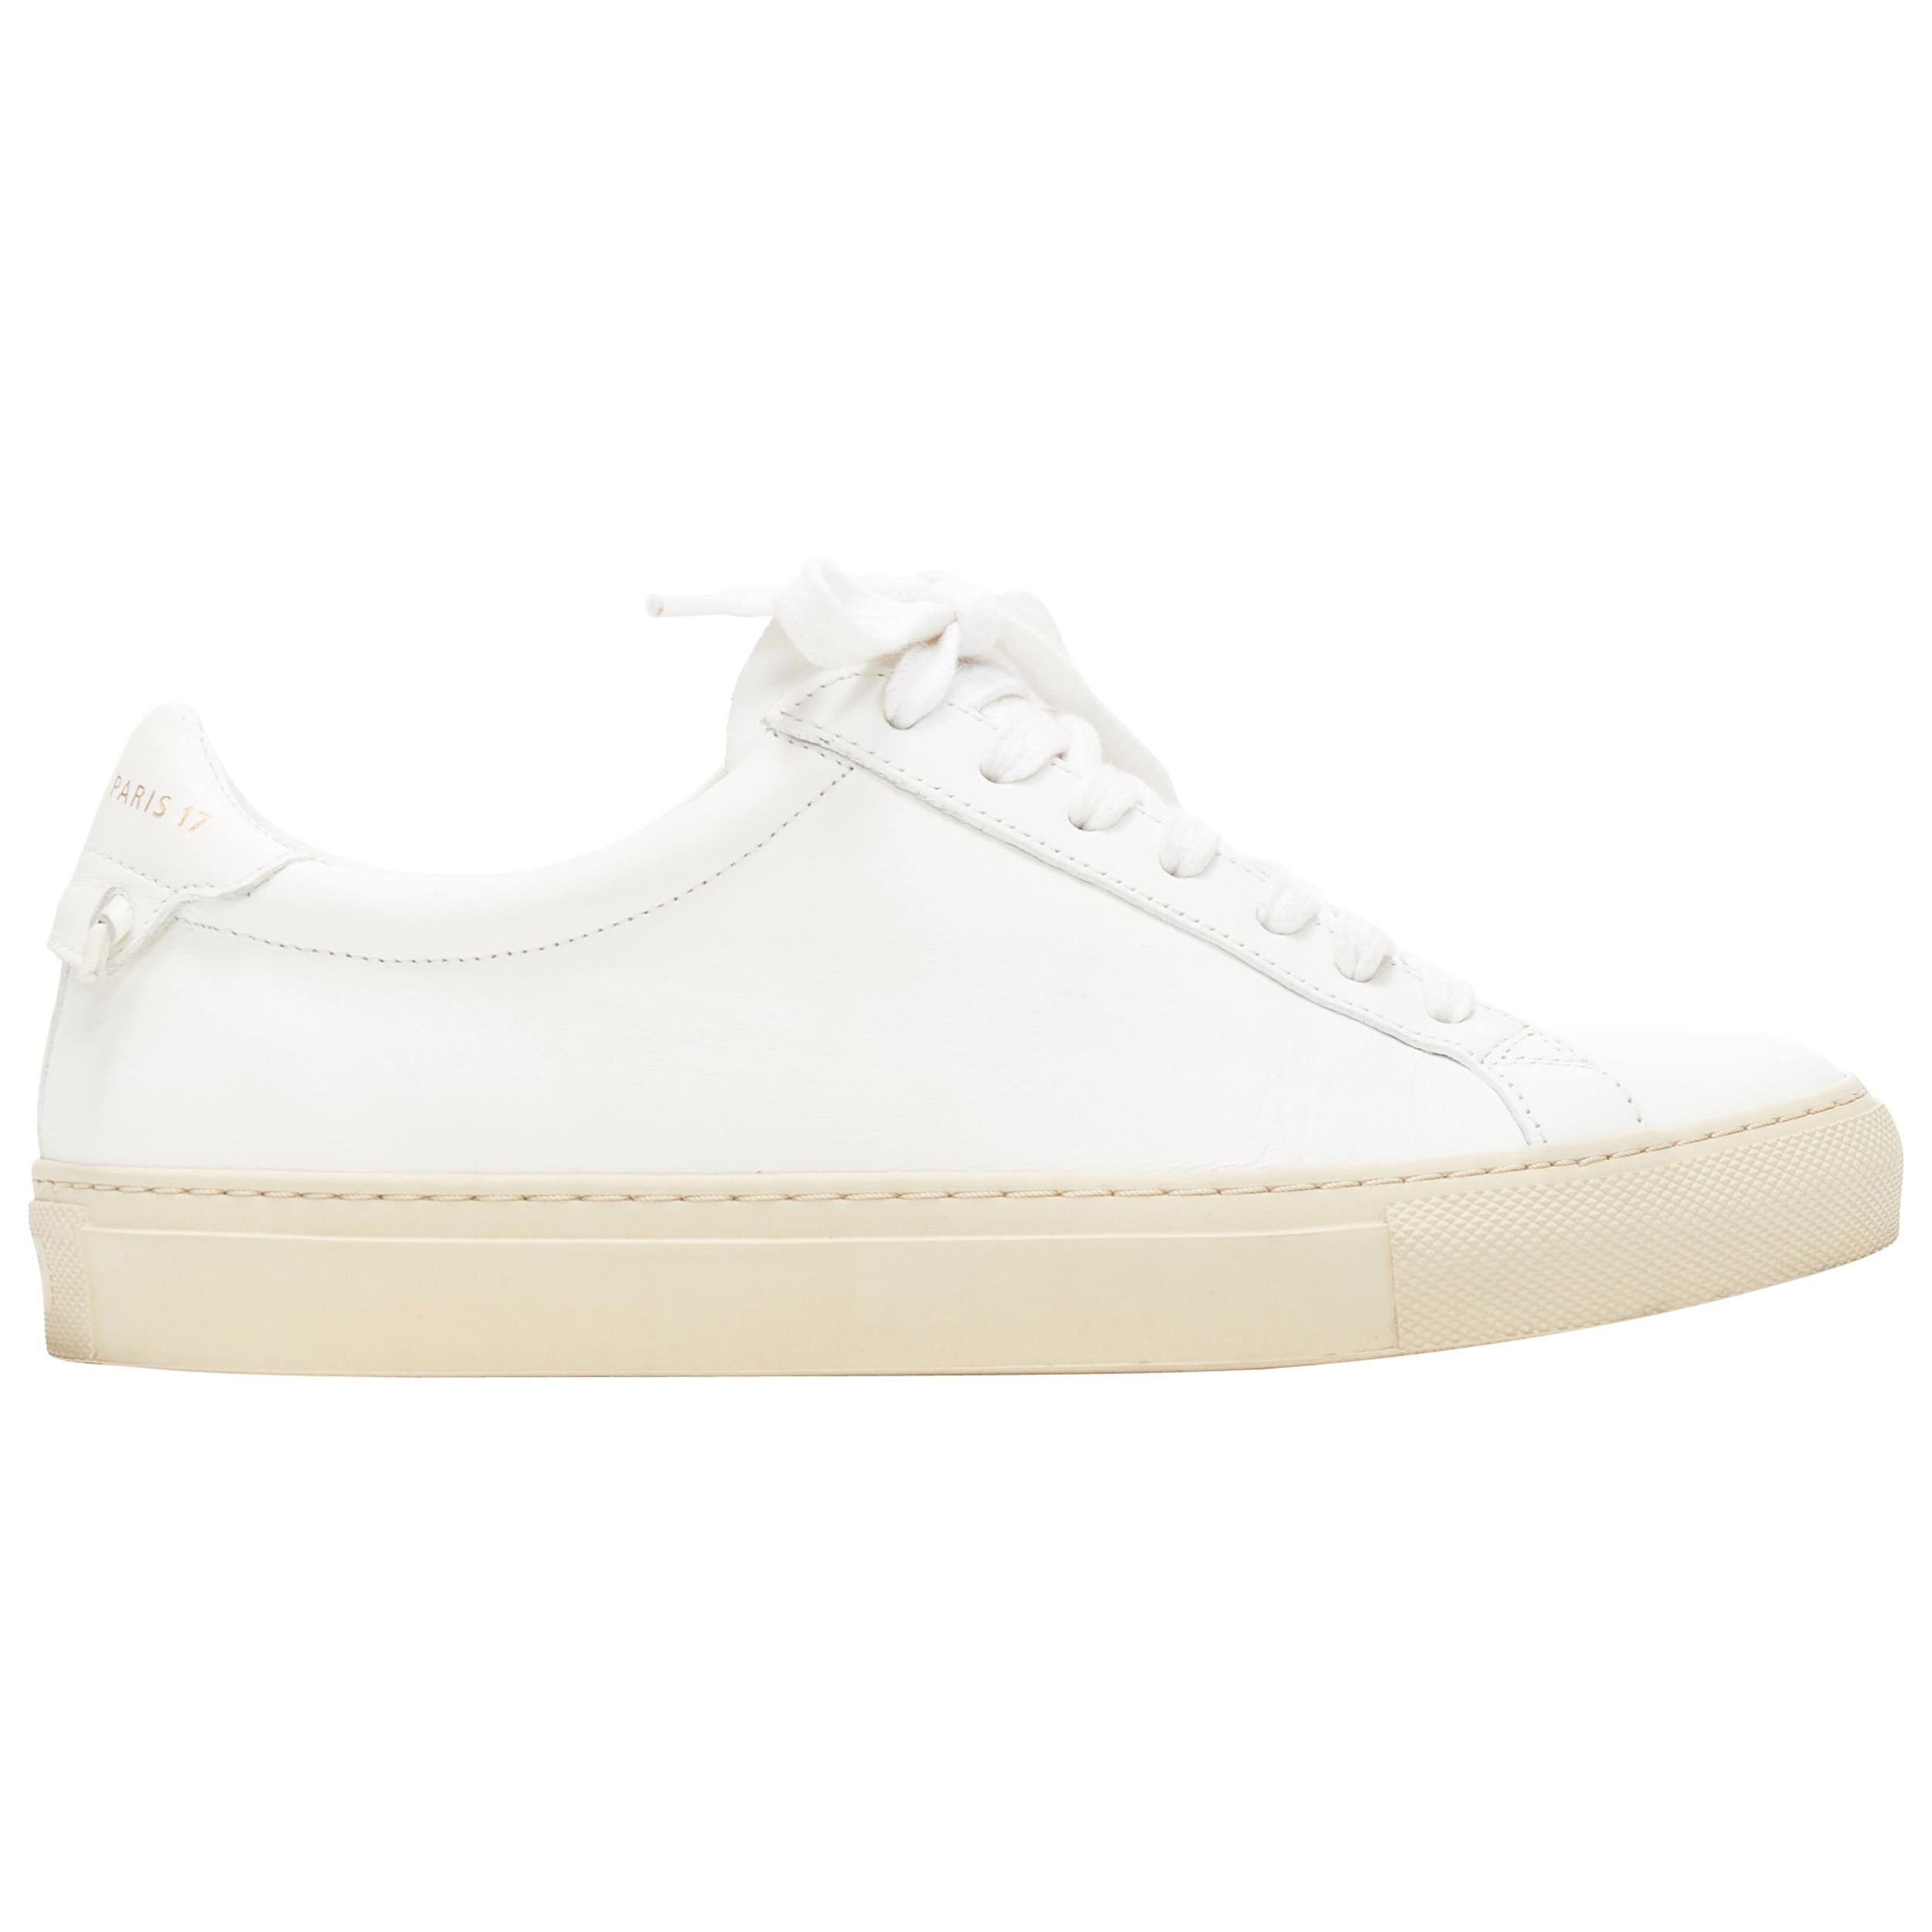 GIVENCHY Paris 17 white leather lace up minimalist low top sneakers EU37.5  at 1stDibs | givenchy paris 17 shoes, givenchy paris 17 sneakers